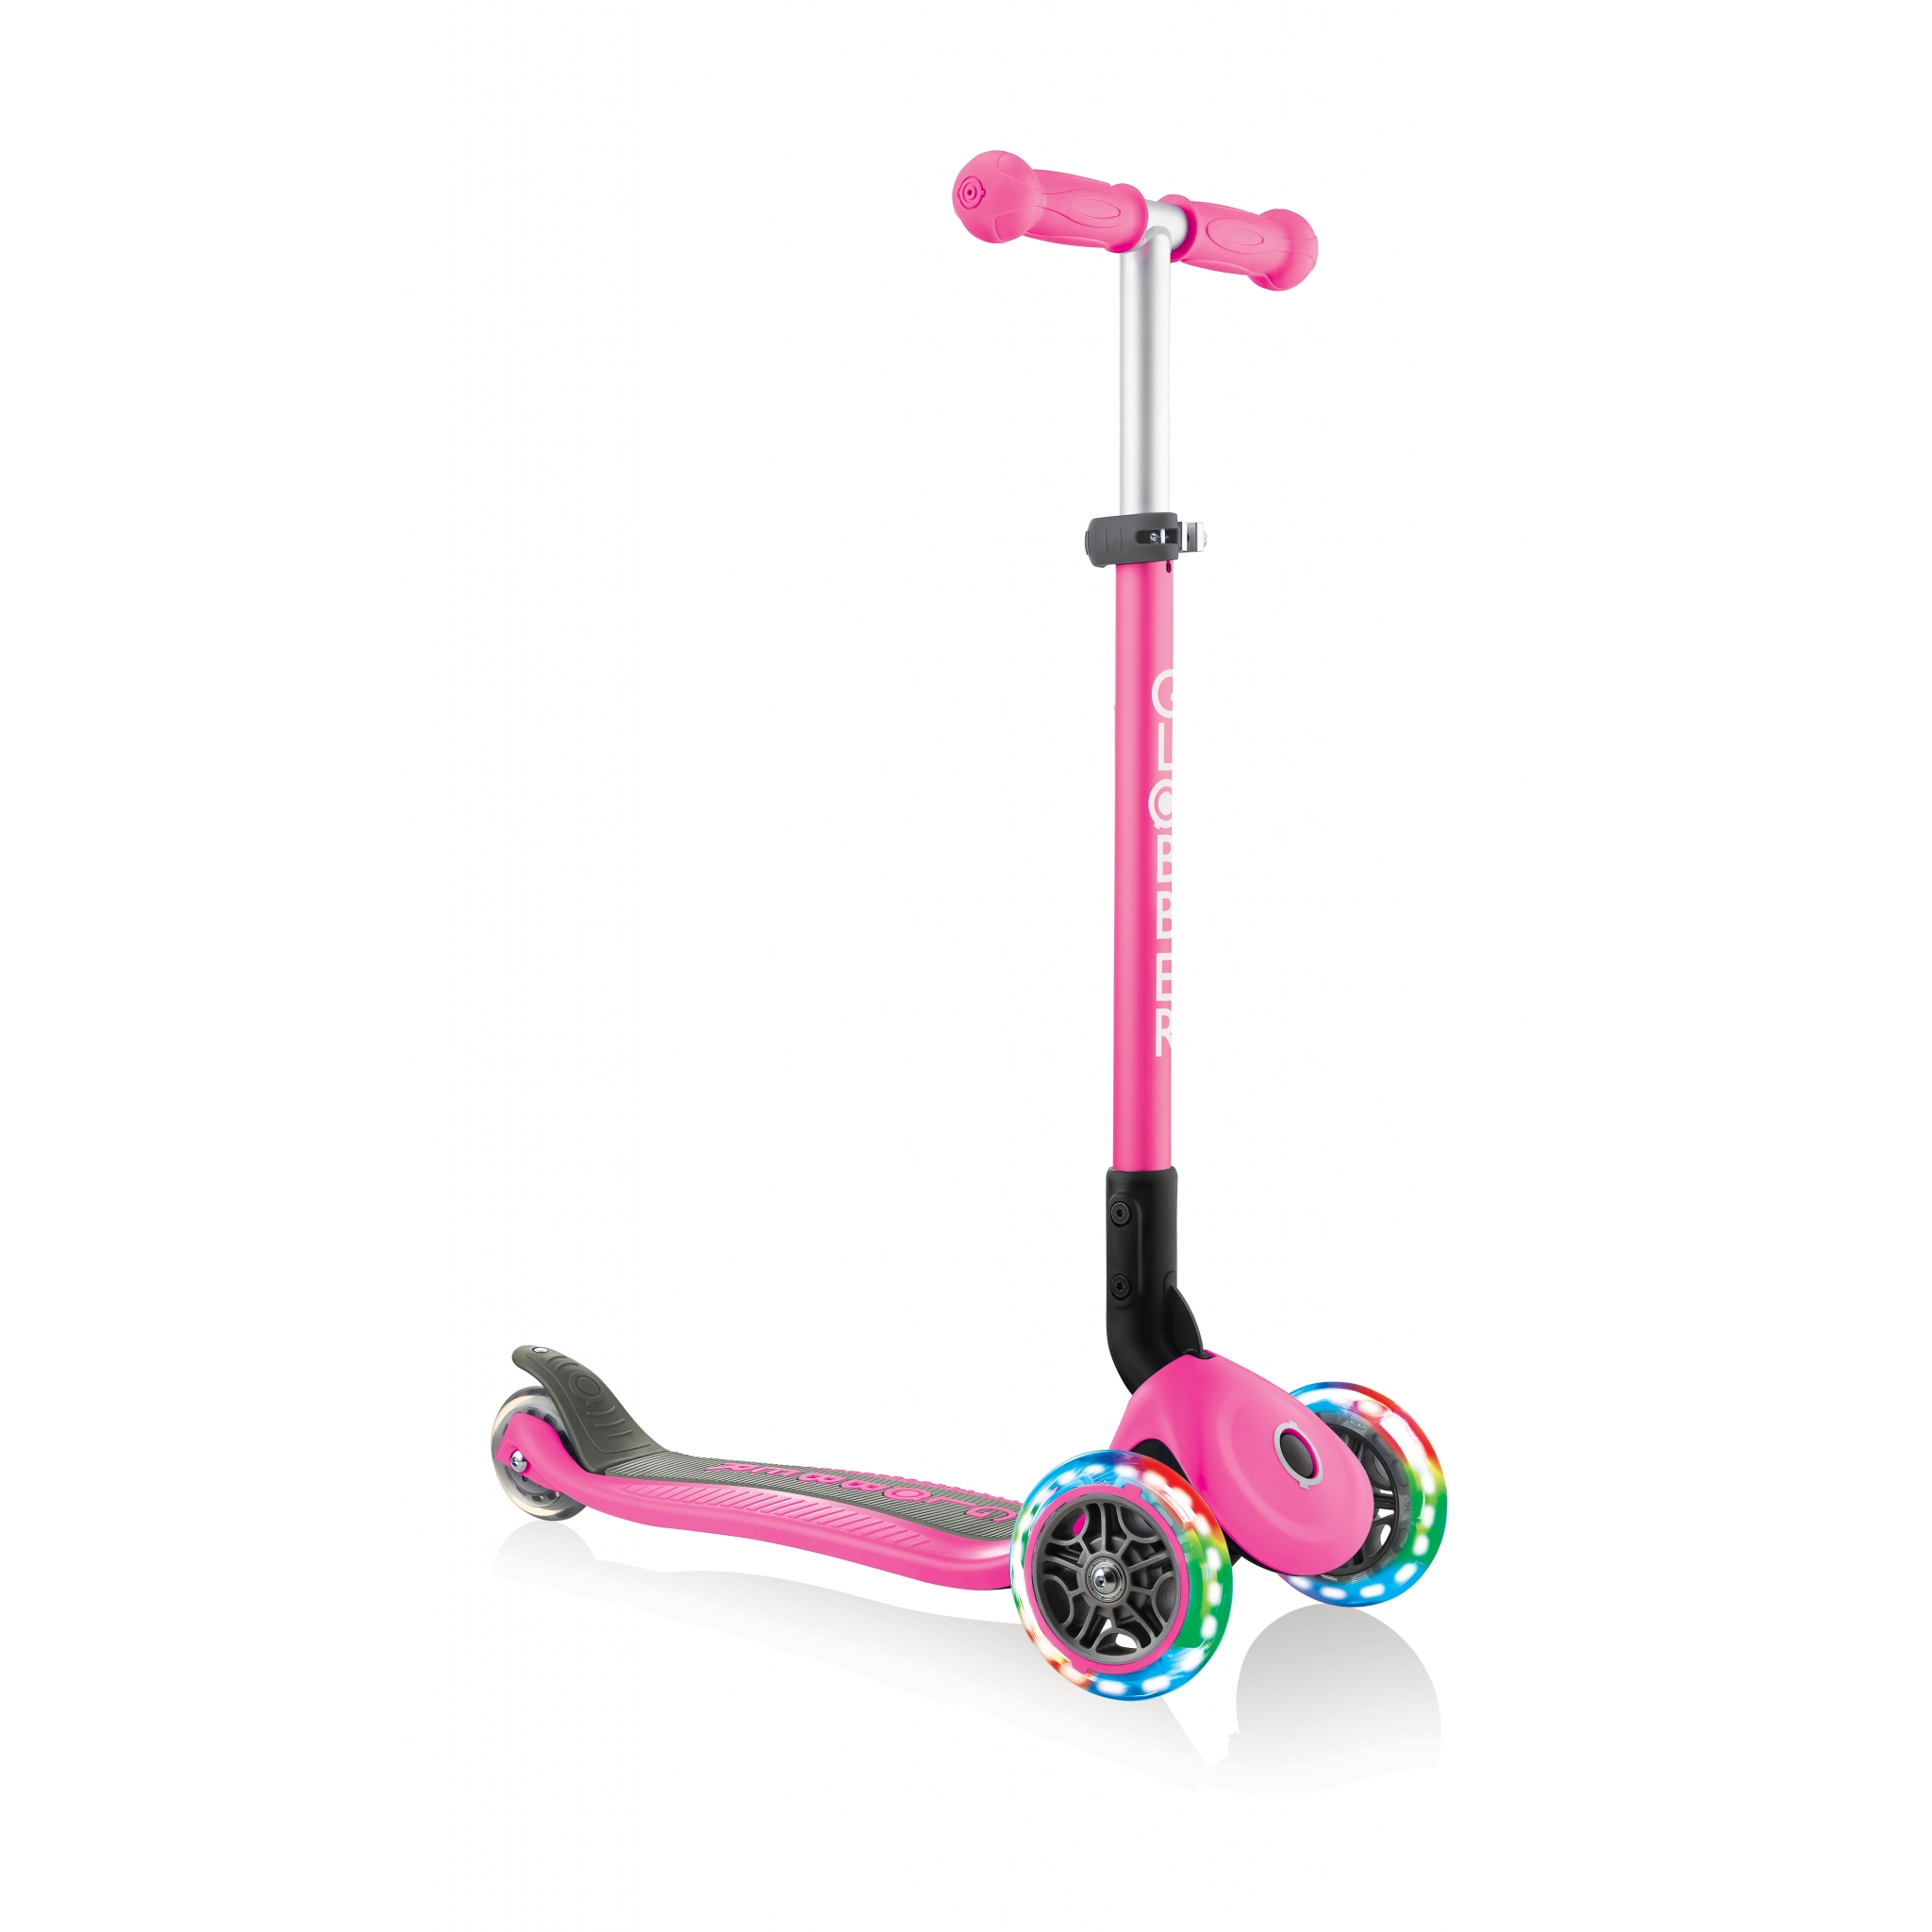 PRIMO-FOLDABLE-LIGHTS-3-wheel-foldable-scooter-light-up-scooter-for-kids-neon-pink 4